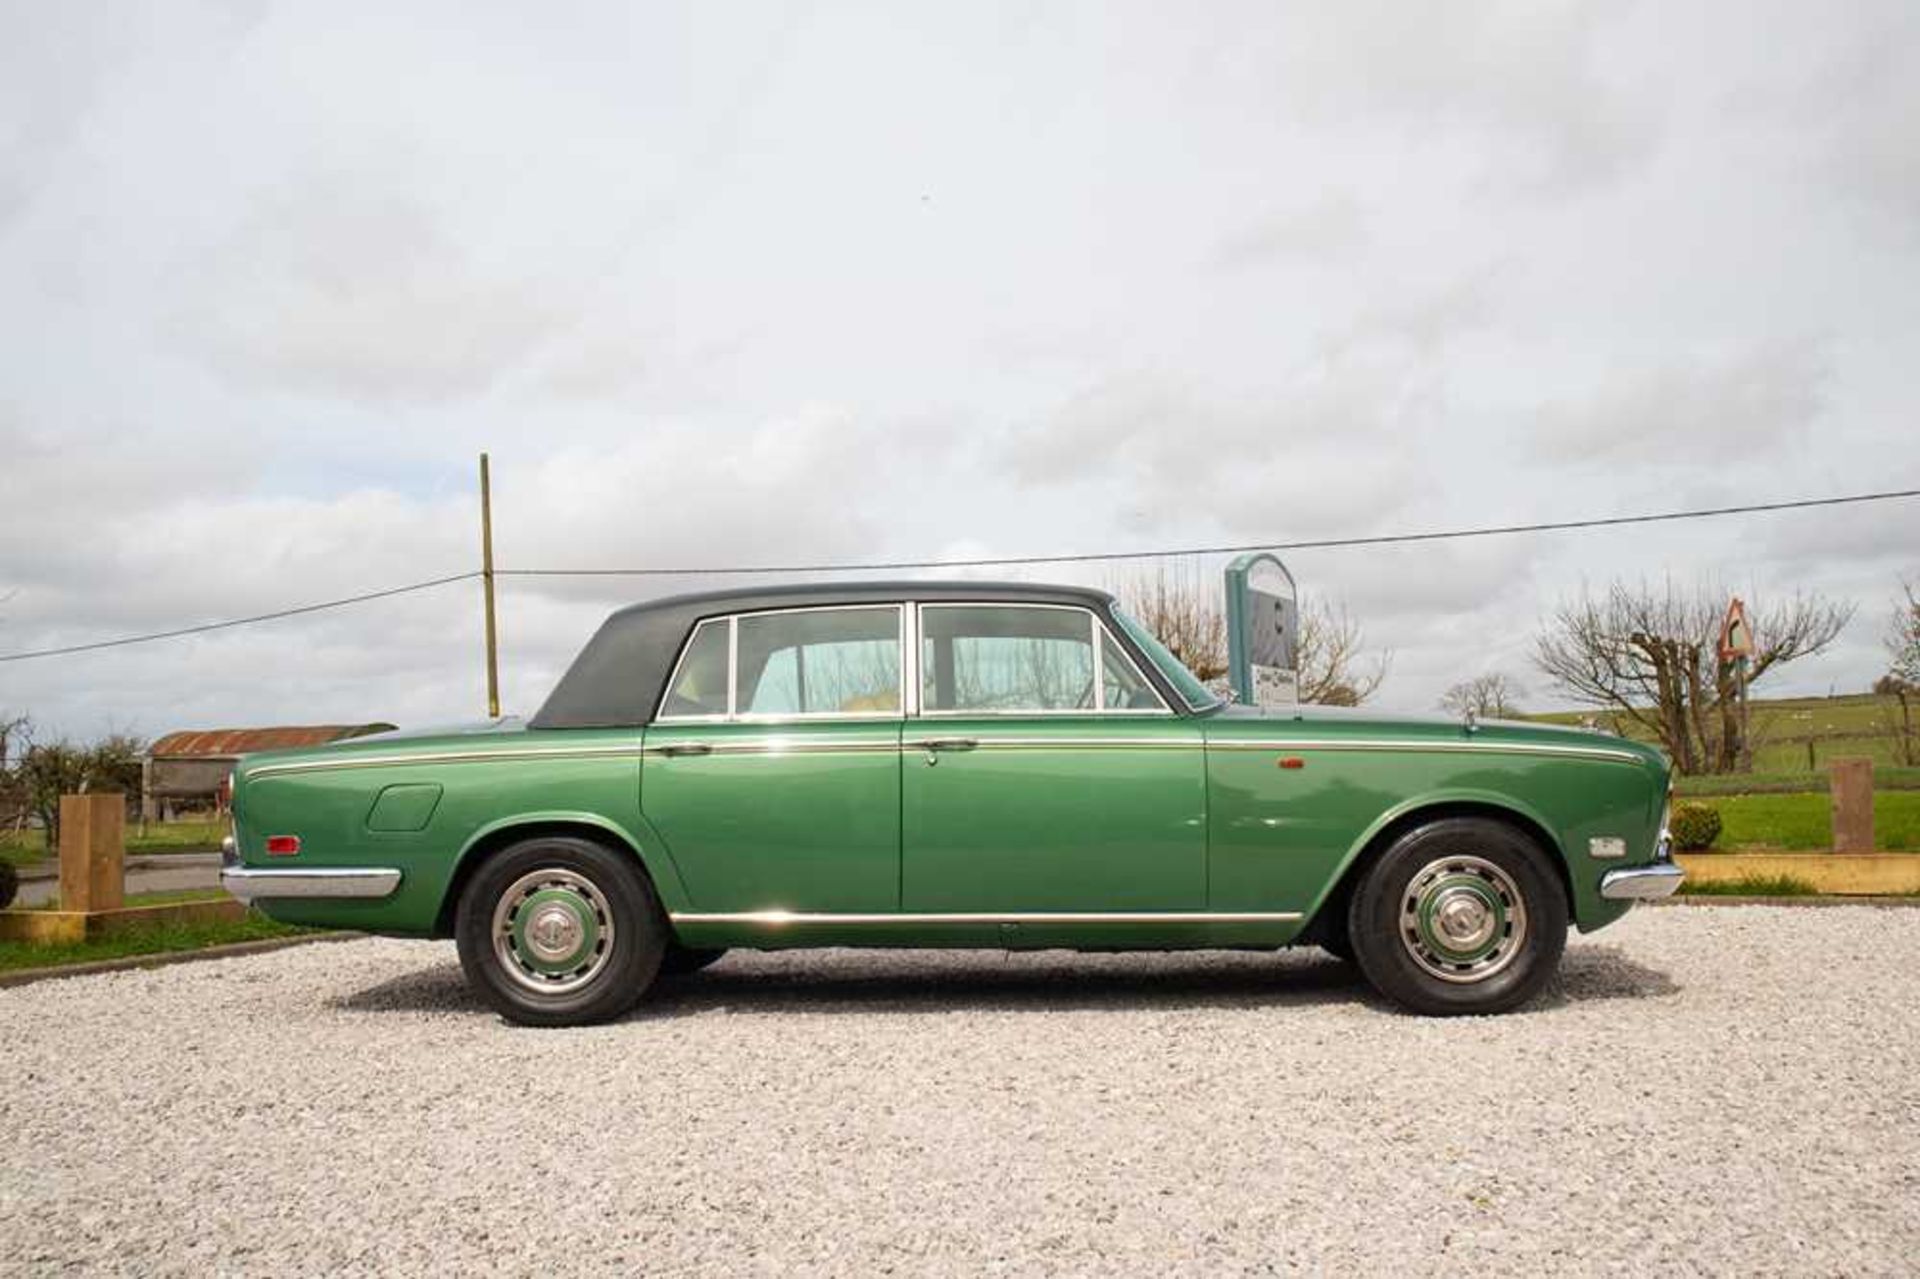 1973 Bentley T-Series Saloon Formerly part of the Dr James Hull and Jaguar Land Rover collections - Image 8 of 22